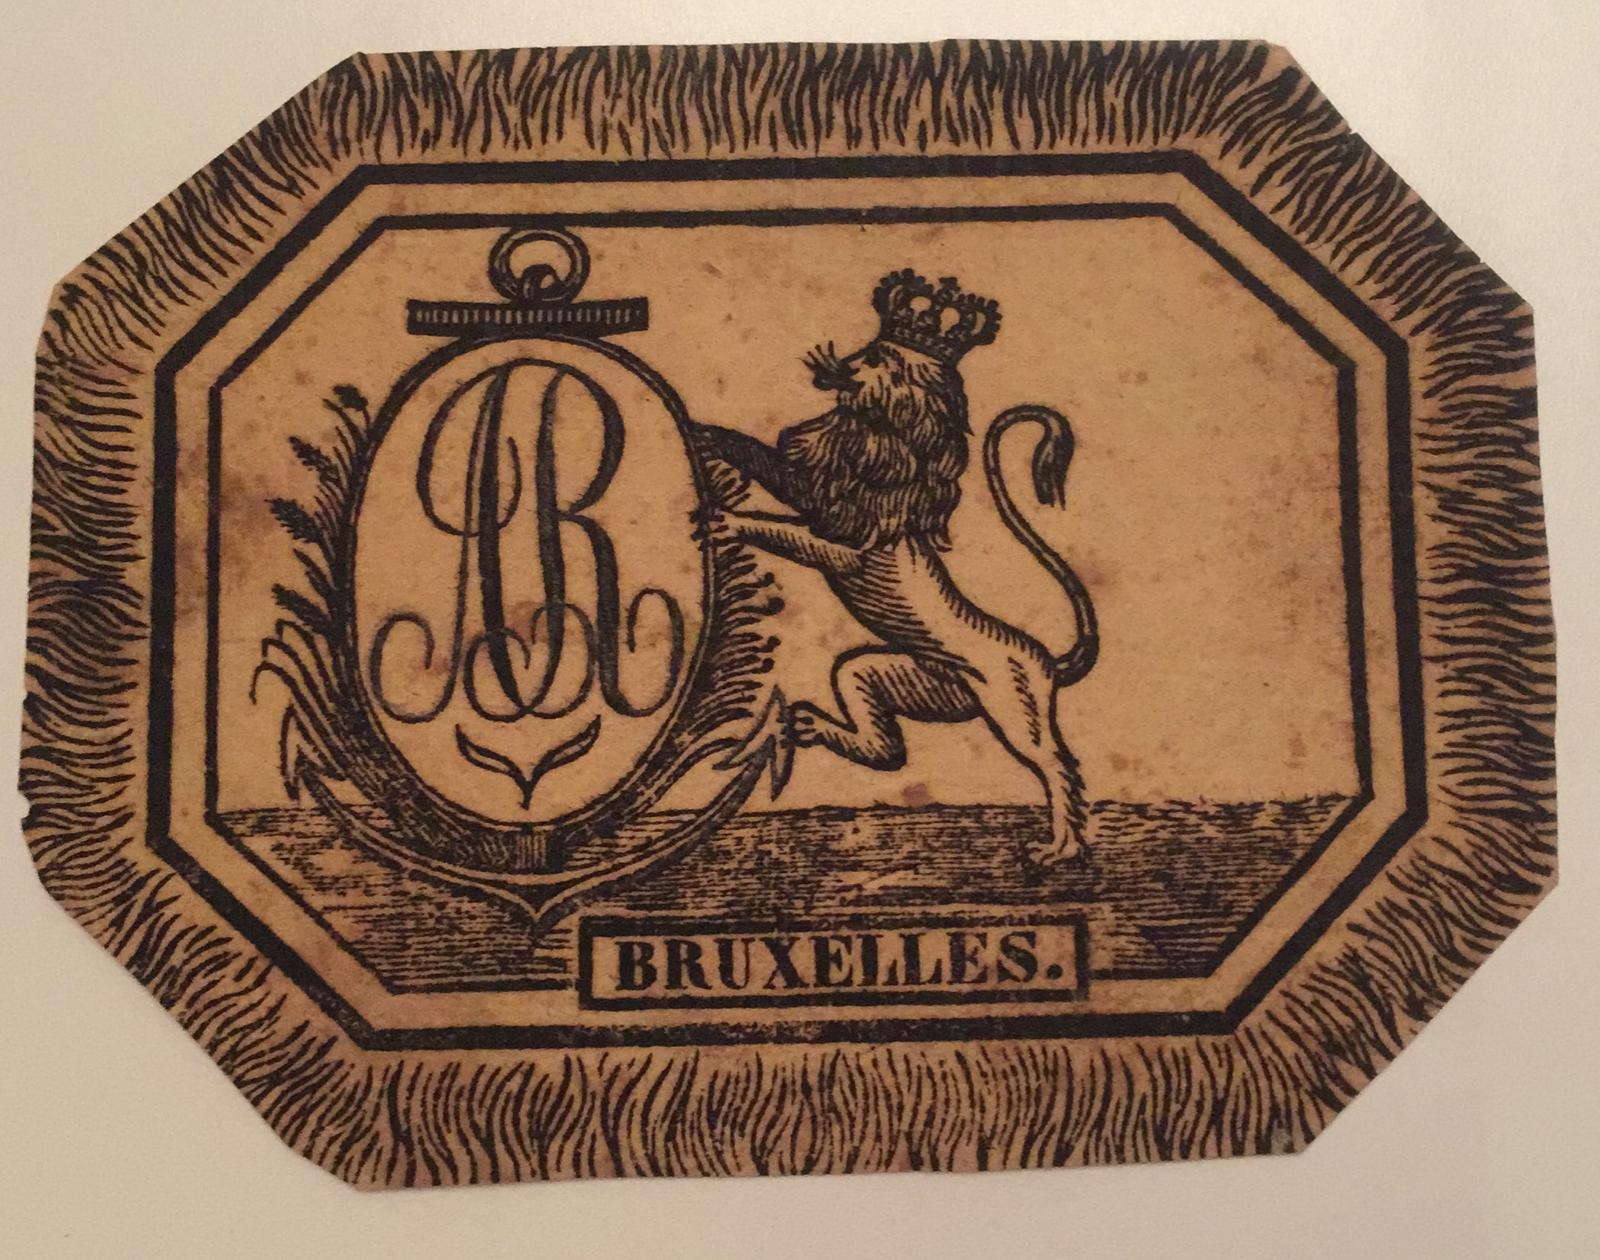 [Vignet] - Vignet with Bruxelles printed in the text underneath a lion holding an oval with the letters A.R., 1 p.